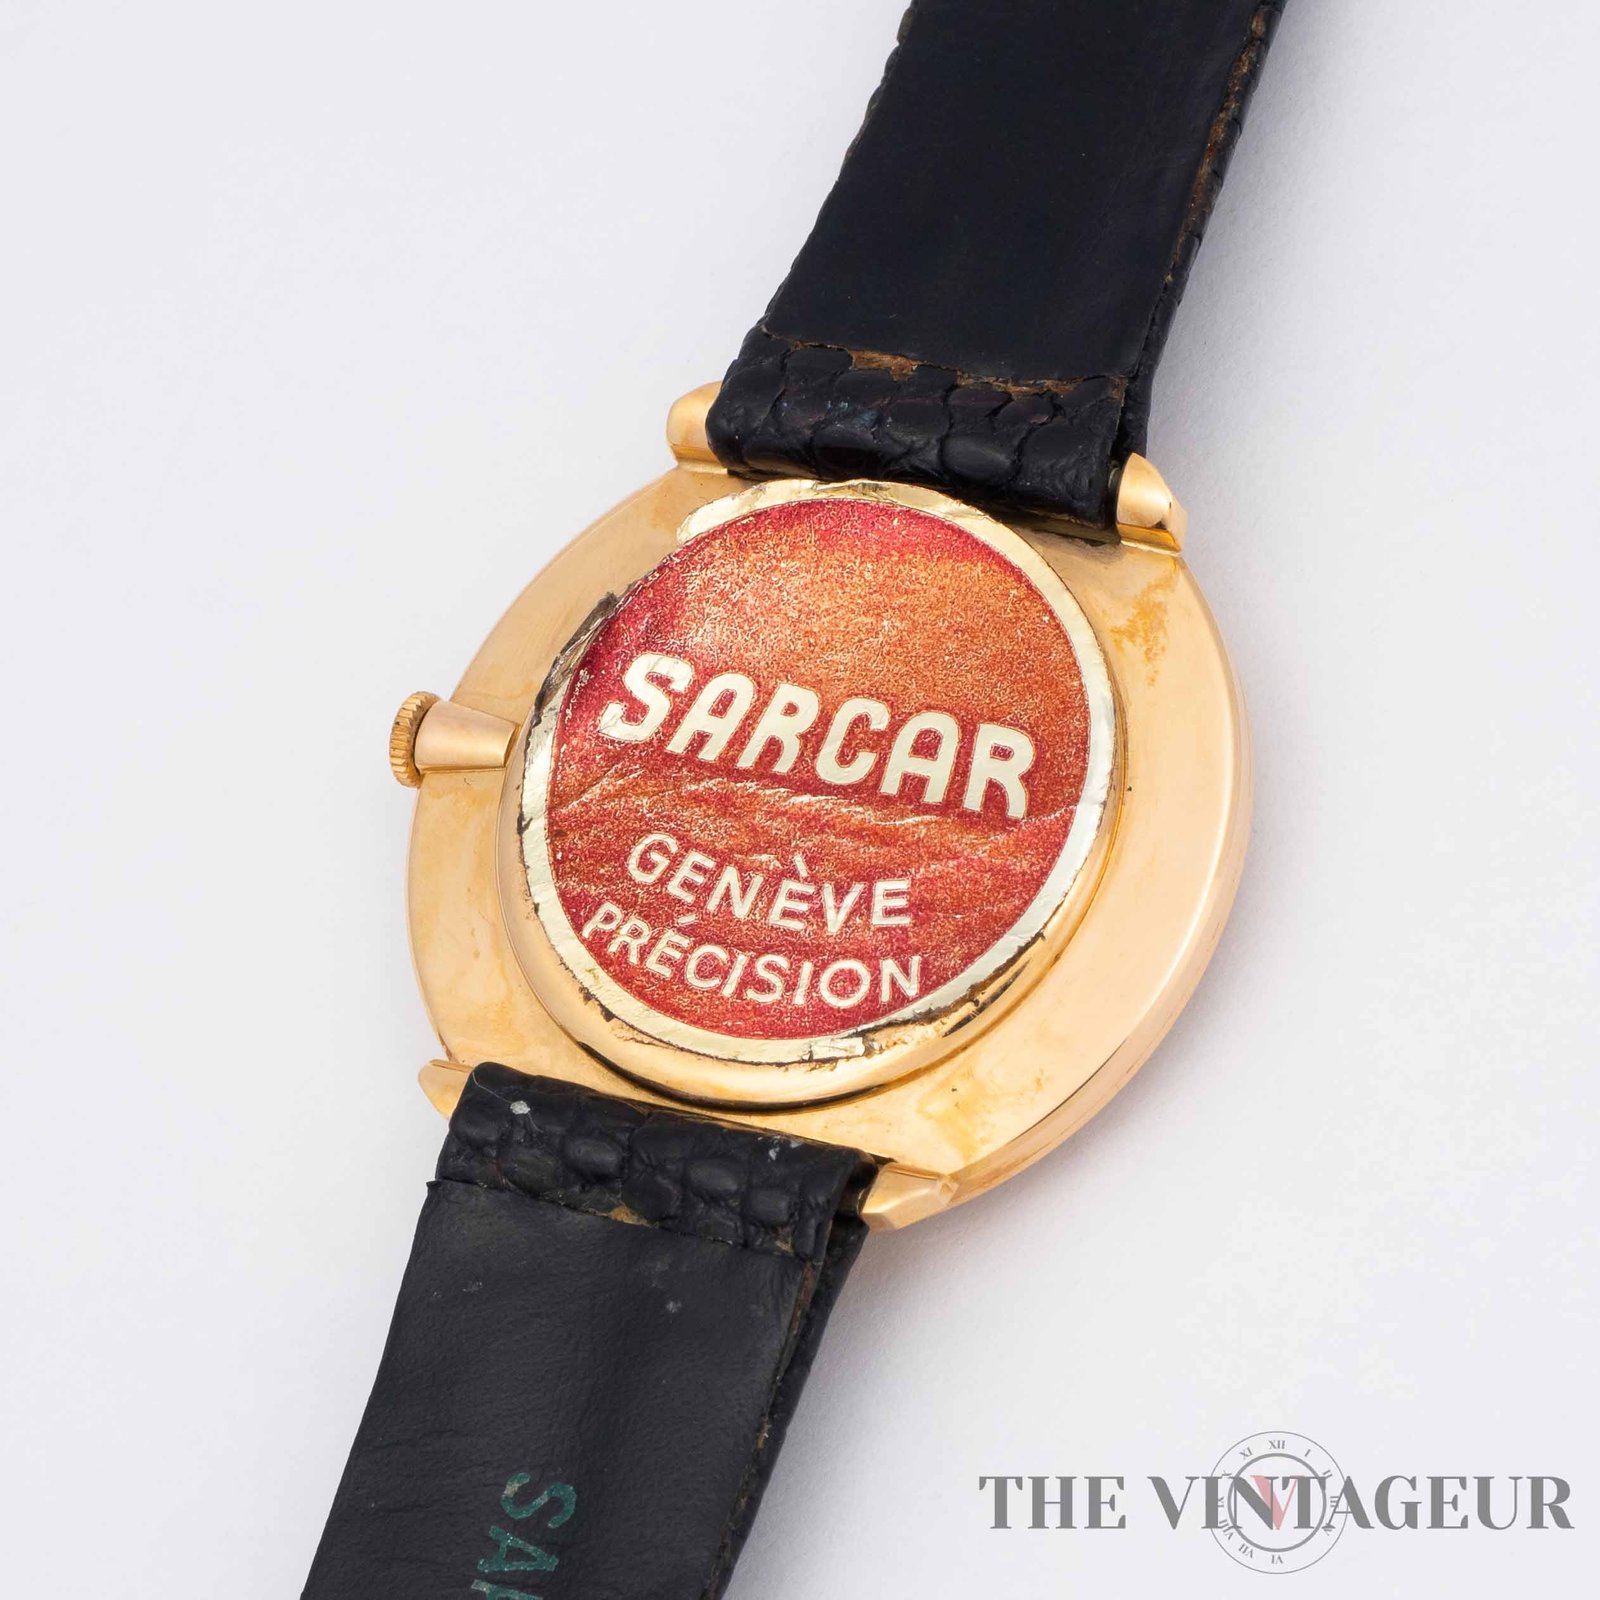 Sarcar - Genève Precision UFO - The Vintageur - Your bespoke watches collection - Collectible watches and more